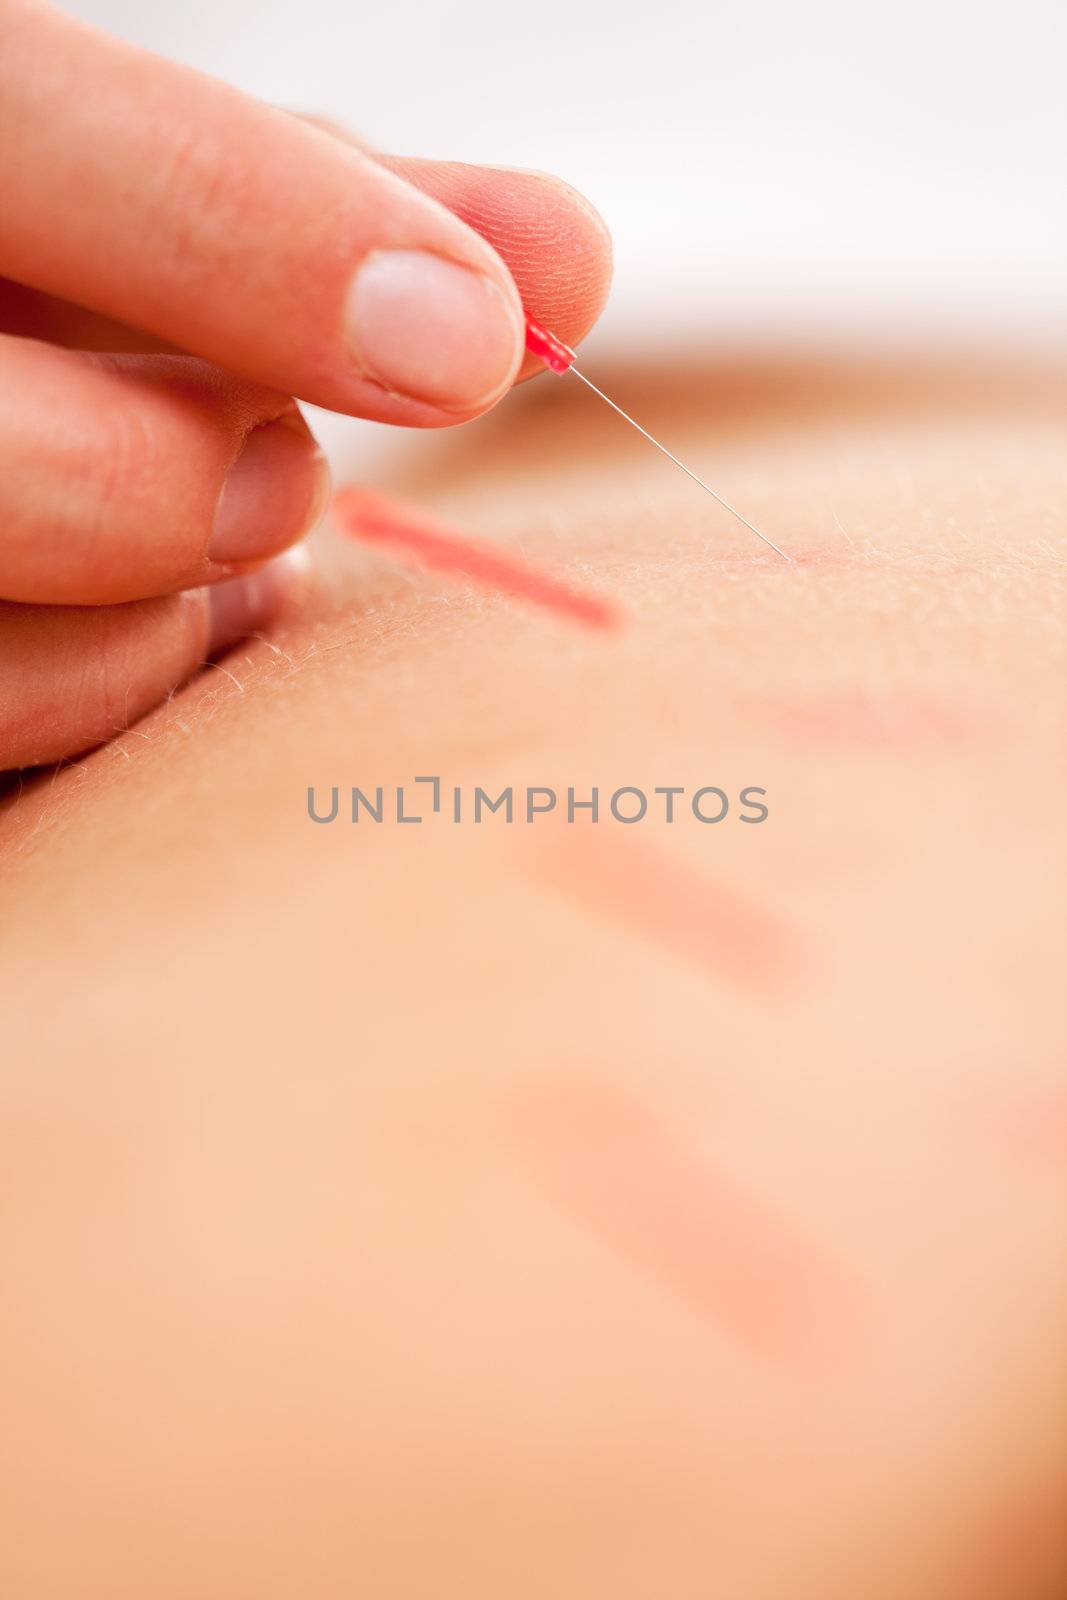 Qi - Acupuncture Neddle Rotation and Stimulation by leaf